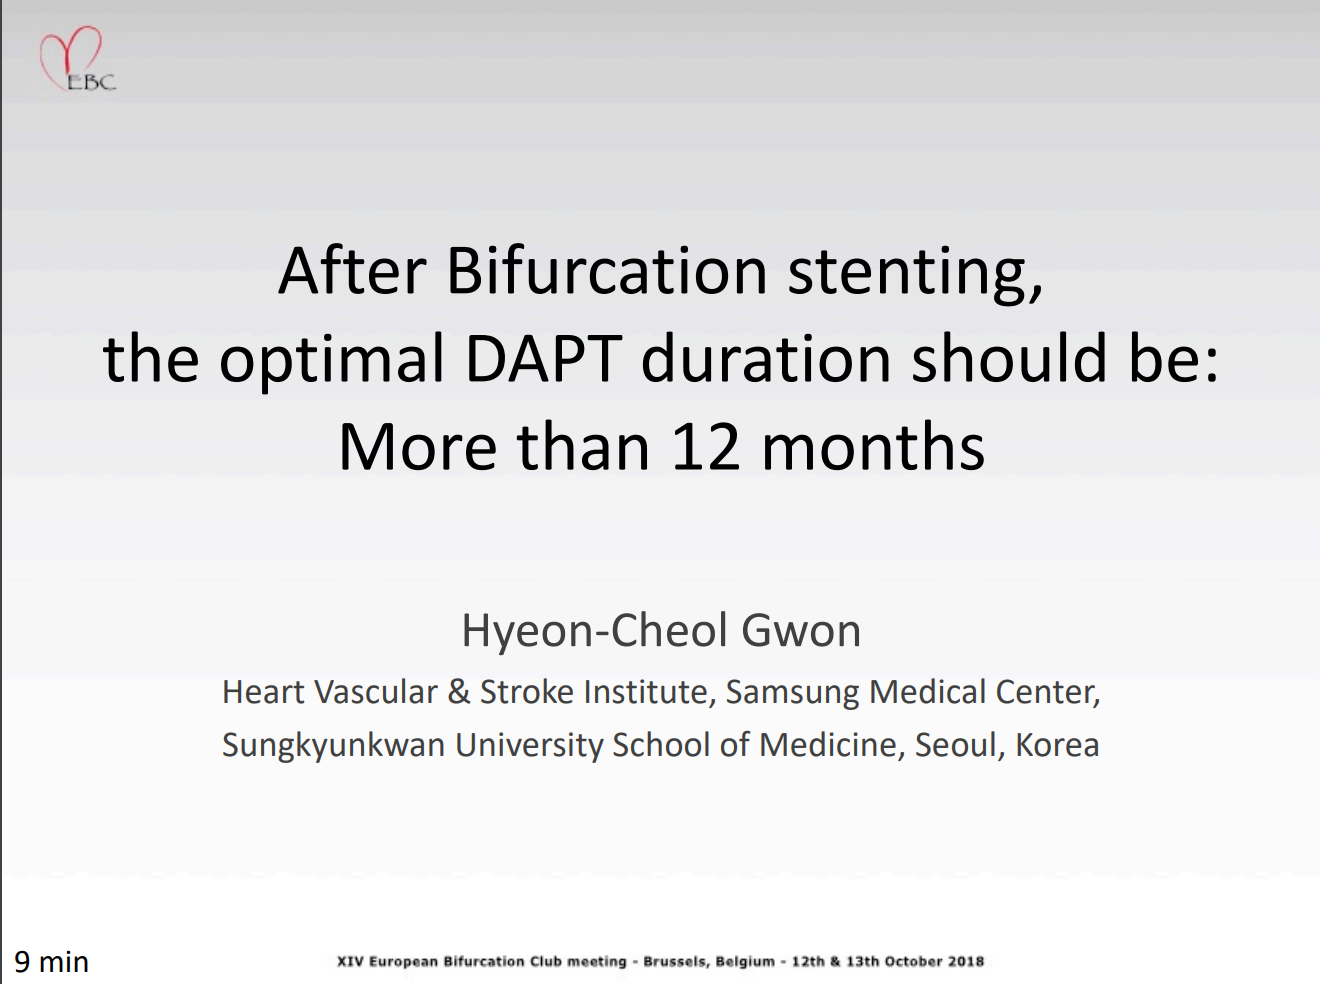 You are currently viewing After Bifurcation stenting, the optimal DAPT duration should be: more than 12 months